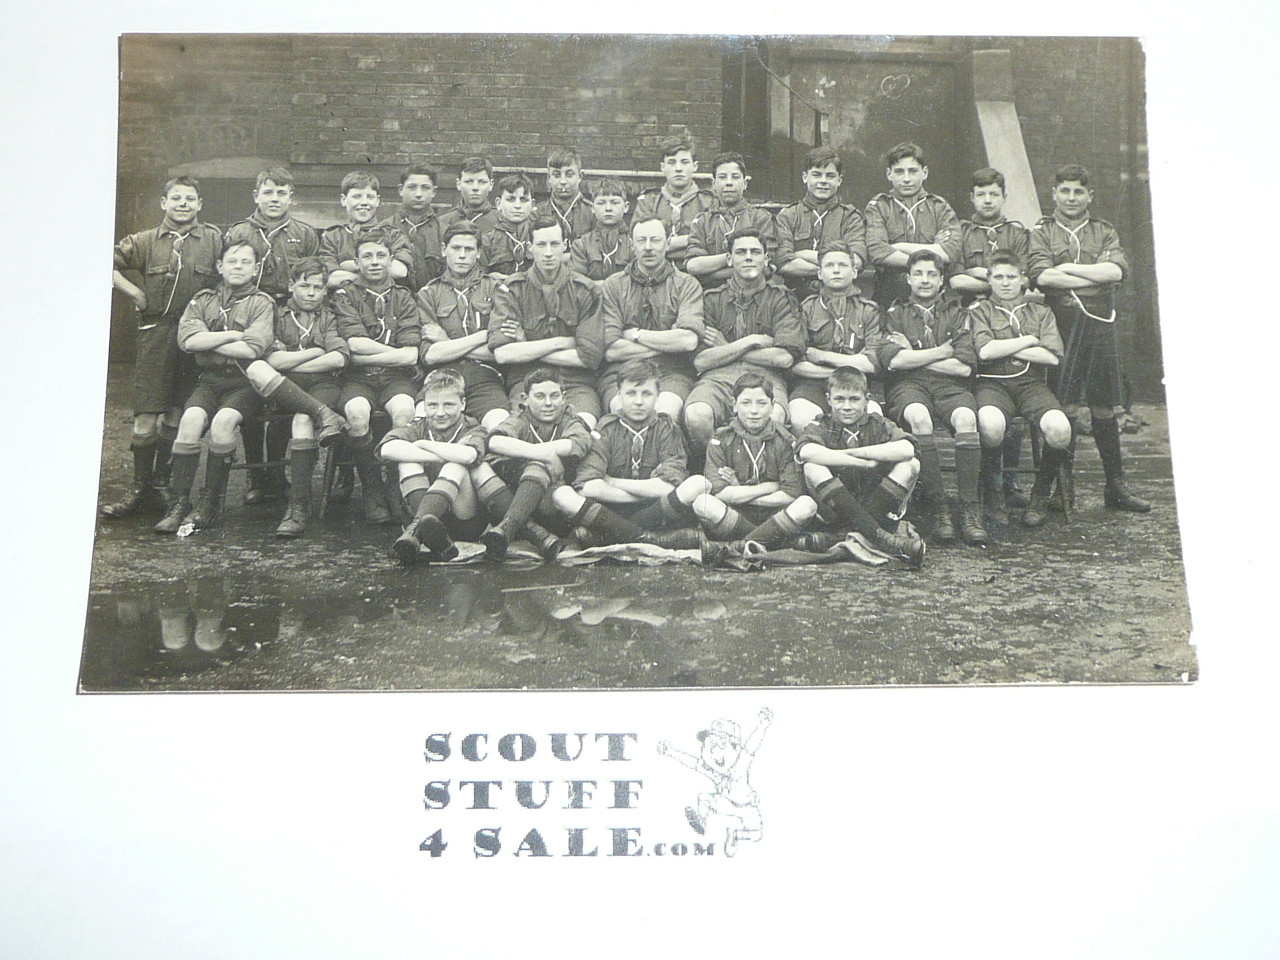 British Boy Scout Postcard, Photo Postcard of a large group of boy scouts #2, UNUSED